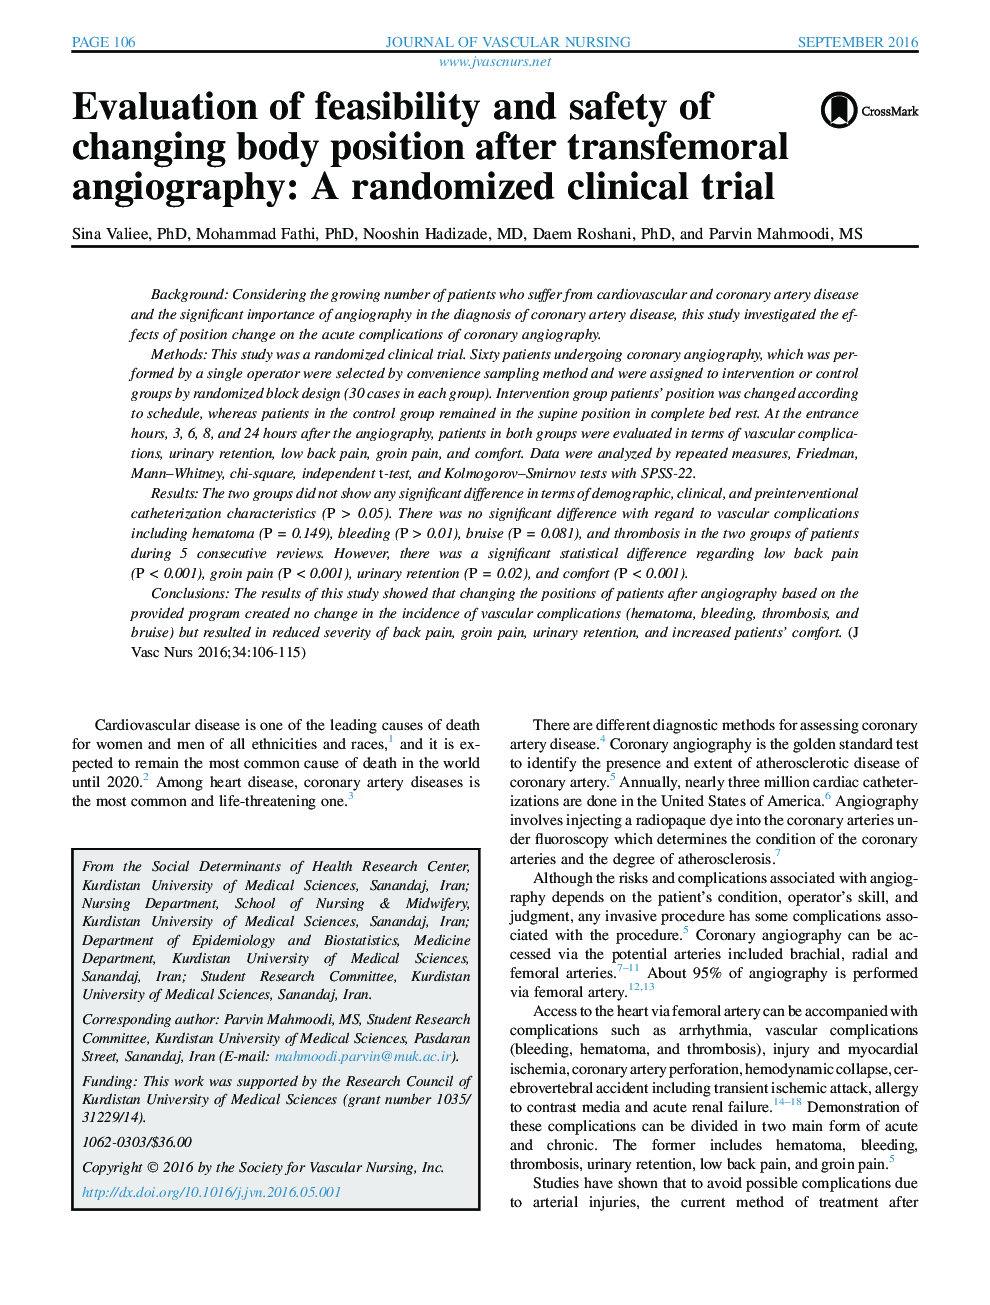 Evaluation of feasibility and safety of changing body position after transfemoral angiography: A randomized clinical trial 